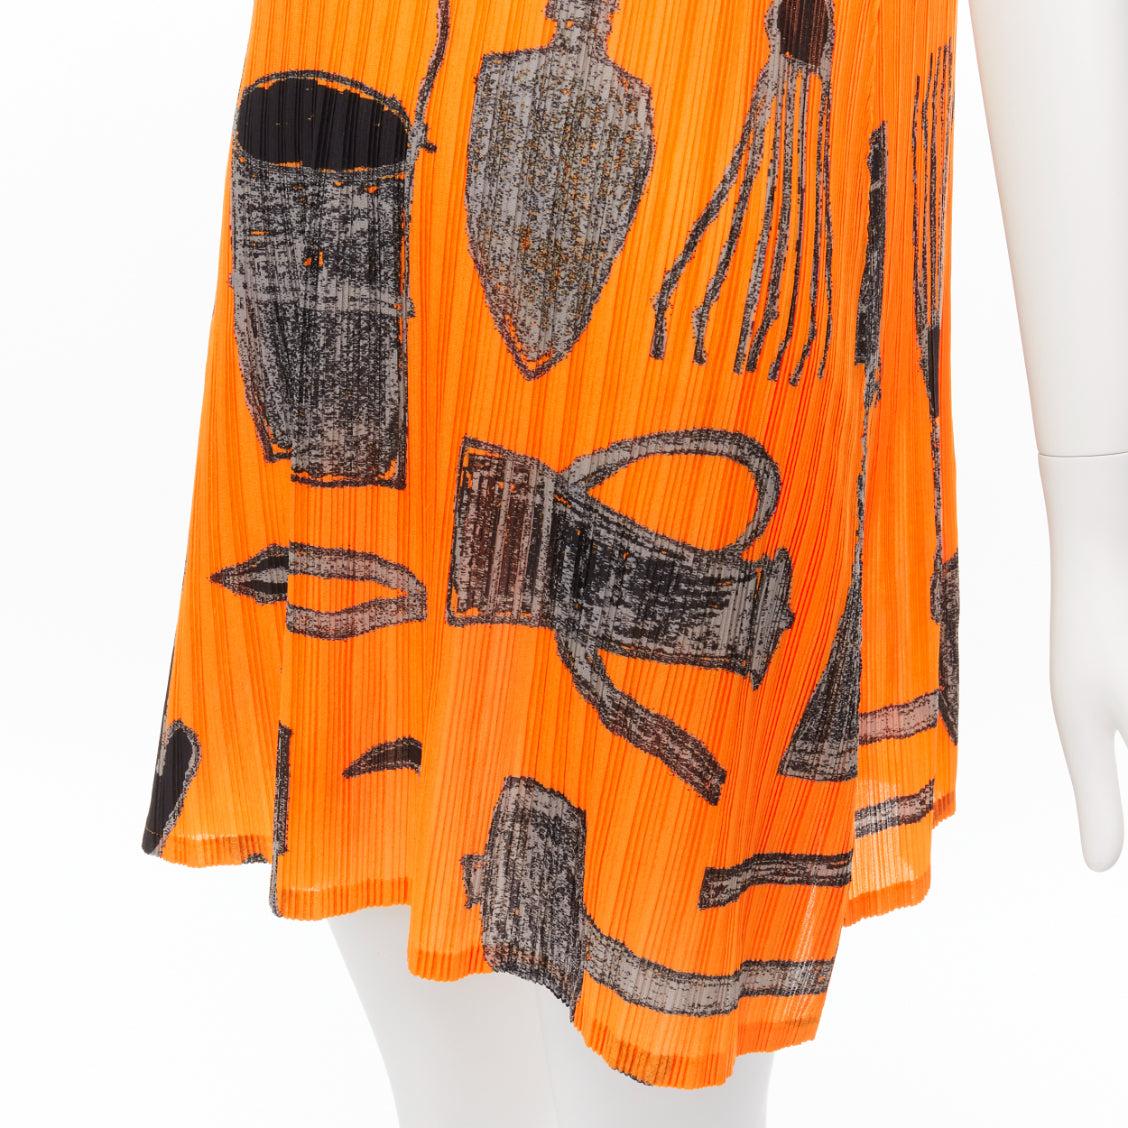 rare ISSEY MIYAKE Pleats Please 2003 orange tools print plisse dress JP17 S
Reference: TGAS/D00580
Brand: Issey Miyake
Collection: 2003 Pleats Please
Material: Polyester
Color: Orange, Black
Pattern: Abstract
Closure: Pullover
Made in: